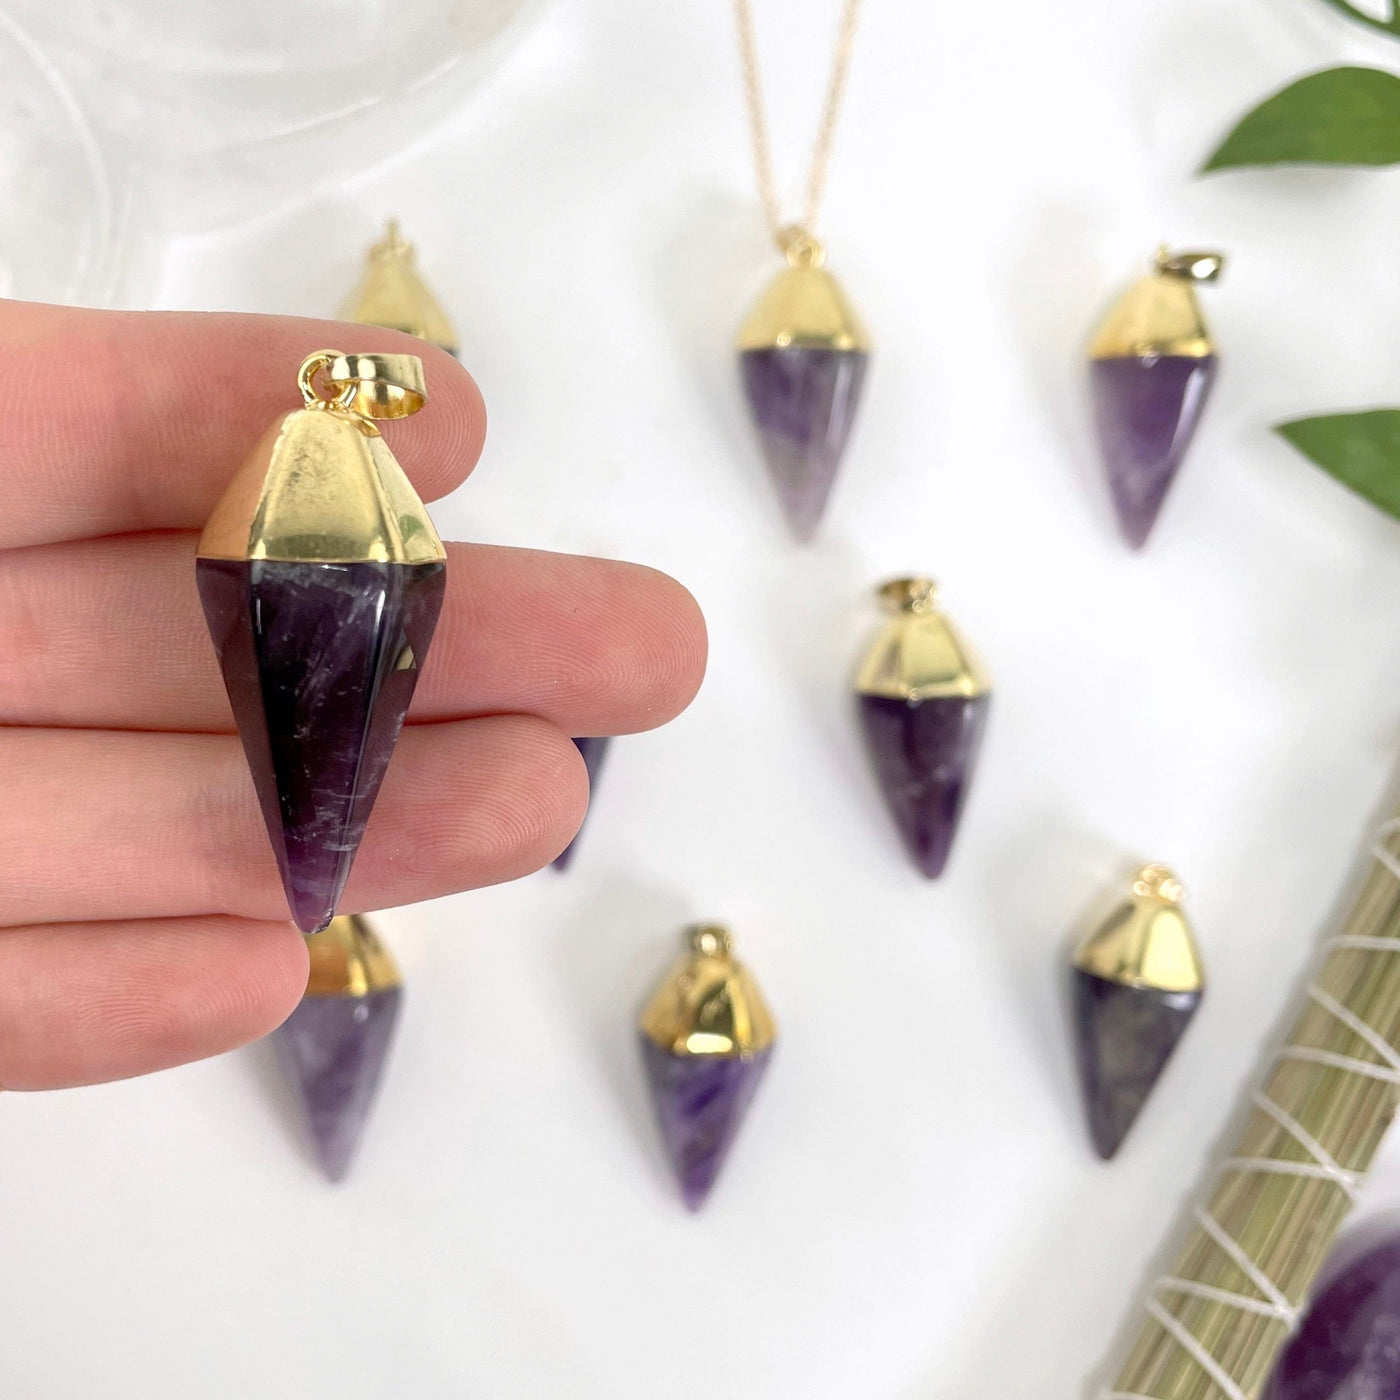 close up of one amethyst quartz spear pendant in hand for size reference and details with many others in the background